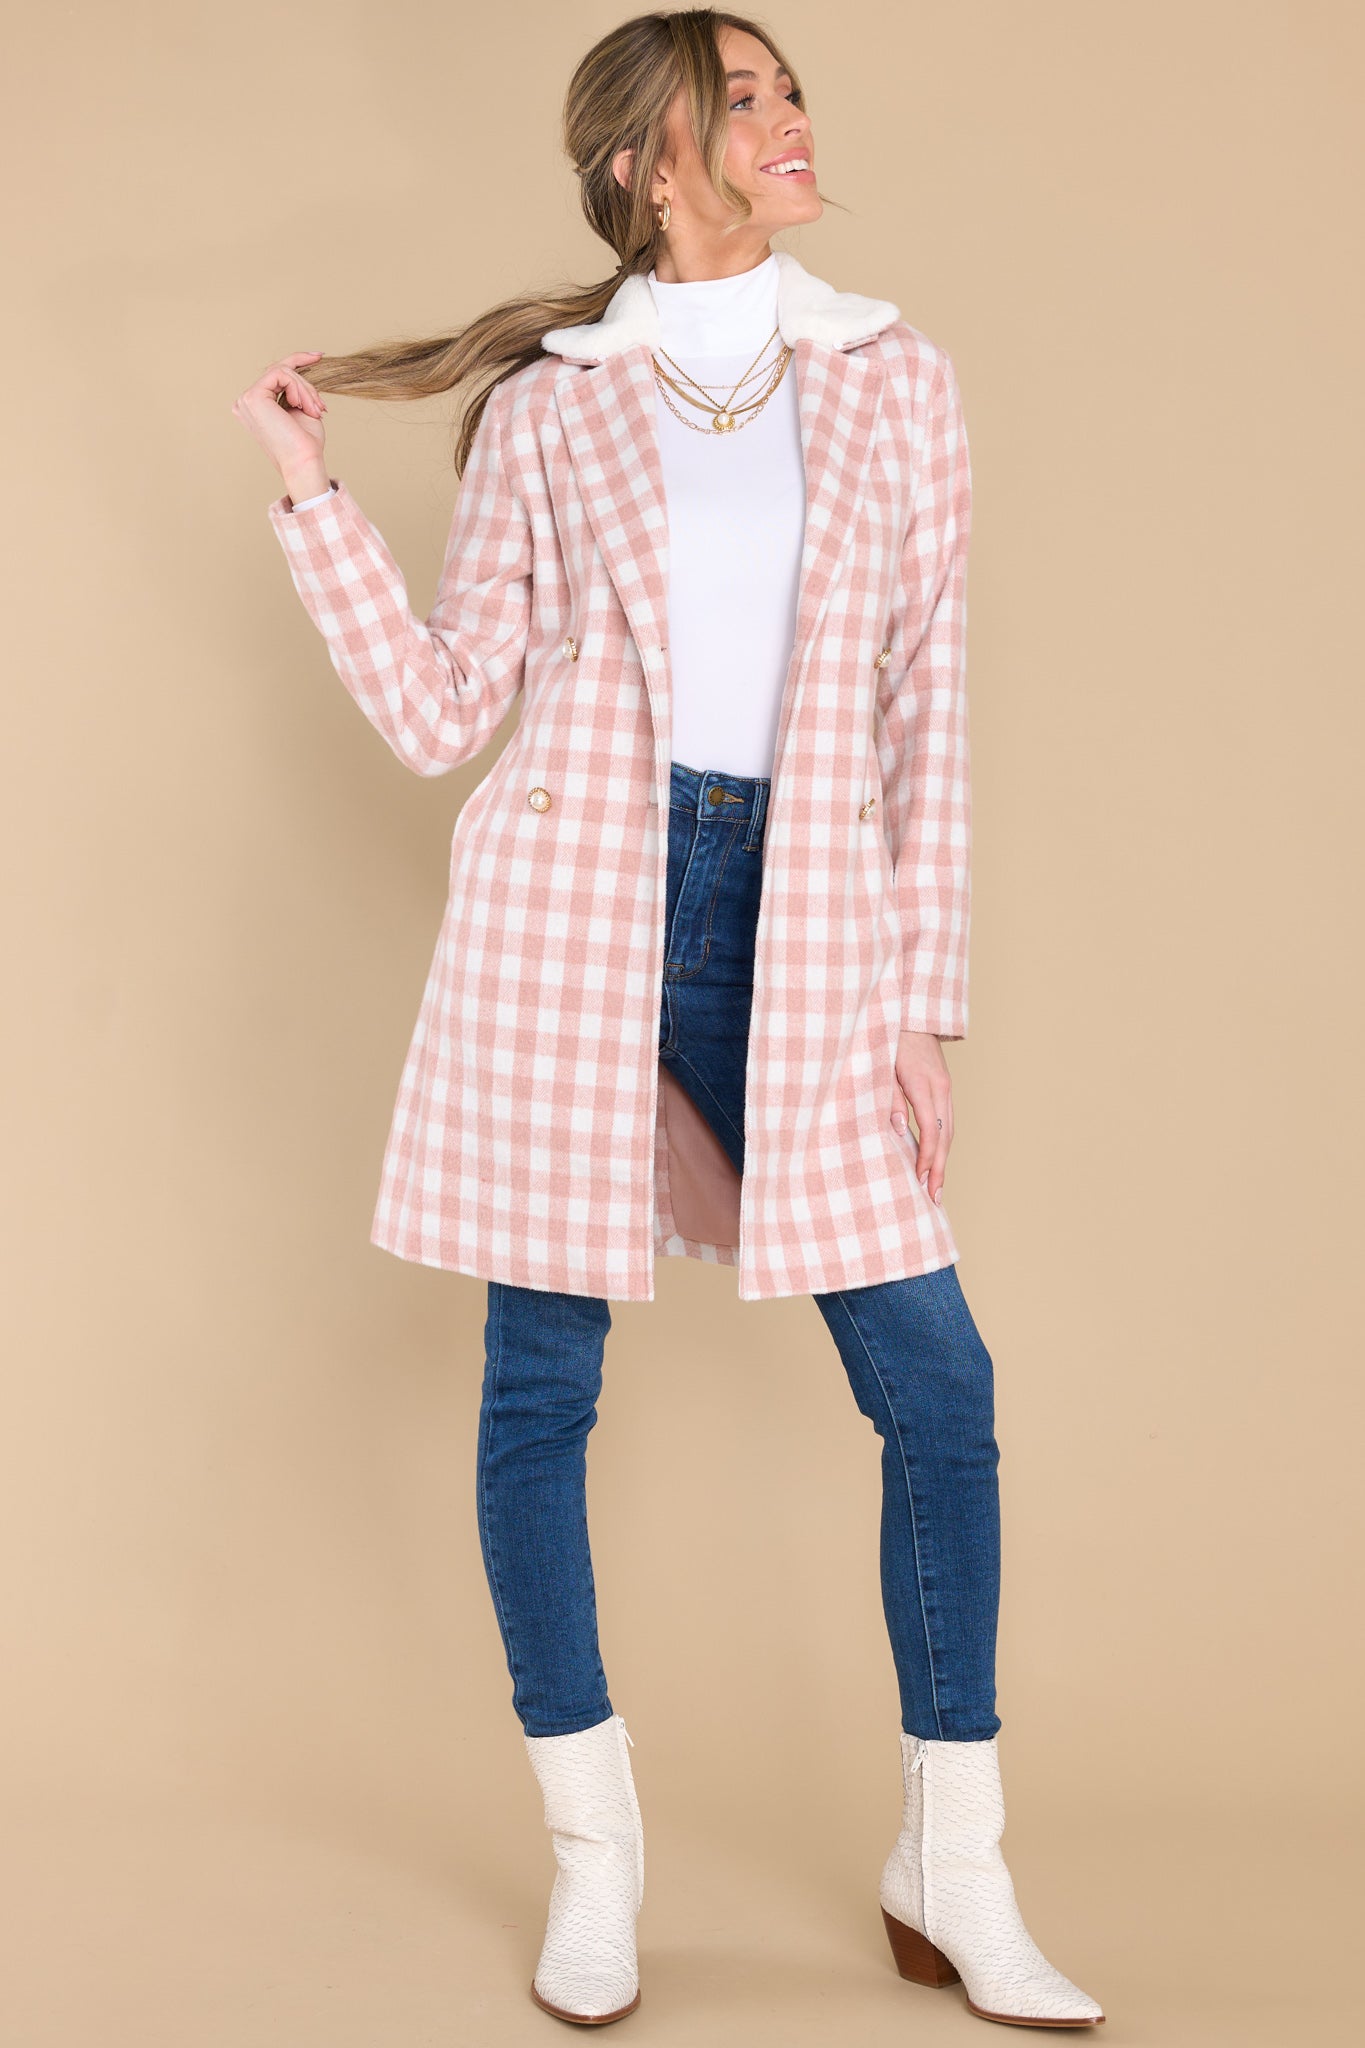 This pink double breasted coat features an open neckline, removeable faux fur collar, a self-tie fabric belt around the waist, and functional waist pockets.